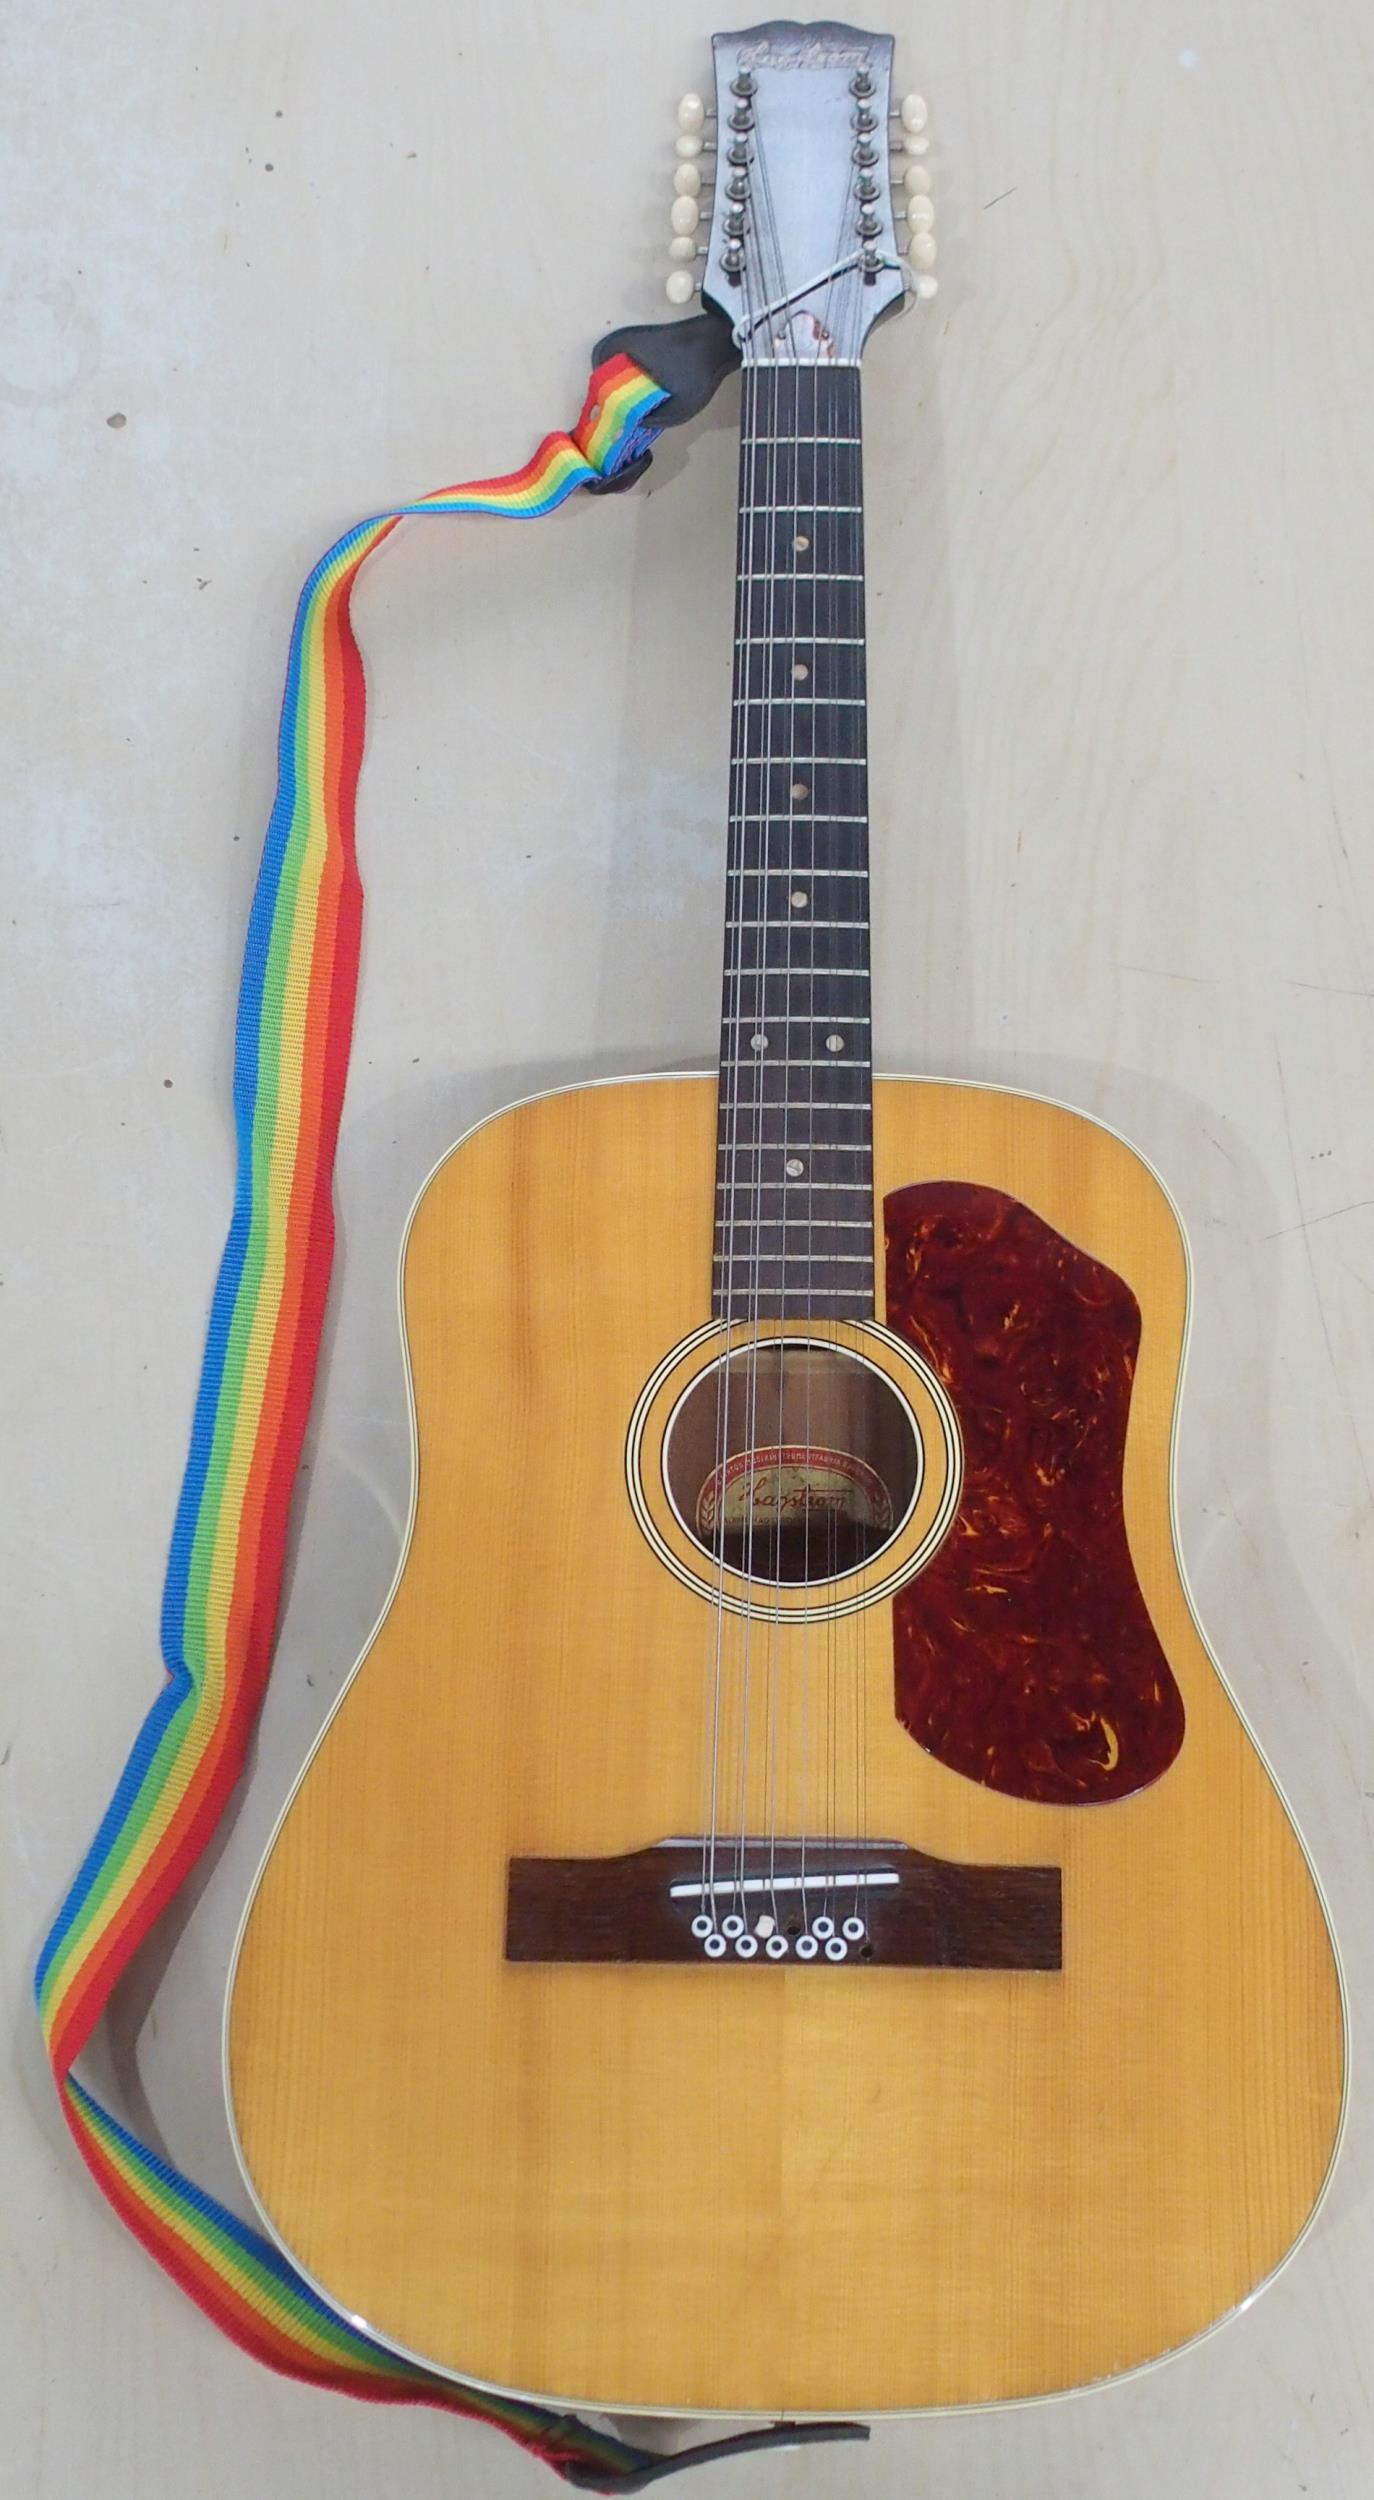 HAGSTROM a vintage 1960's twelve string acoustic guitar by Hagstrom Sweden serial number 76232, 18